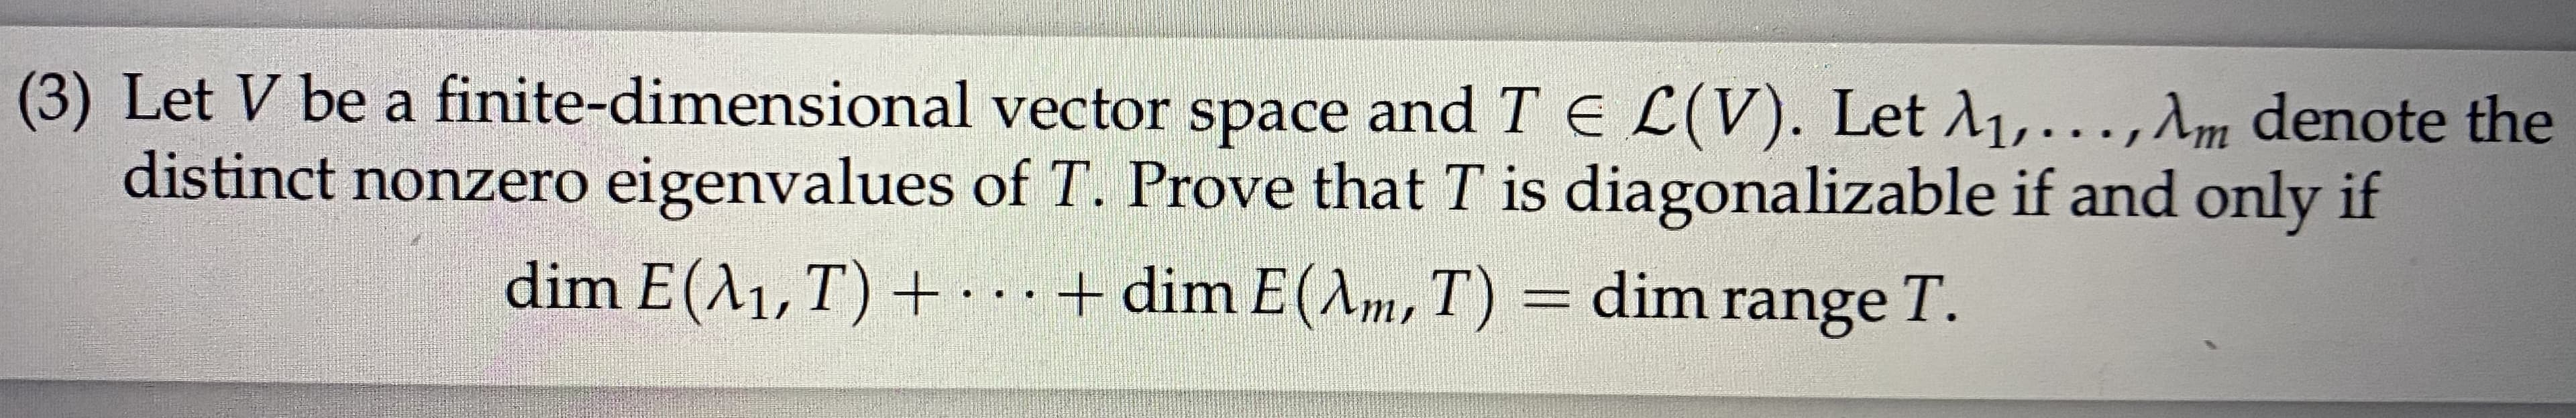 (3) Let V be a finite-dimensional vector space and TE L(V). Let A1,...,Am denote the
distinct nonzero eigenvalues of T. Prove that T is diagonalizable if and only if
dim E(A1,T) +
...+ dim E(m, T) = dim range T.
